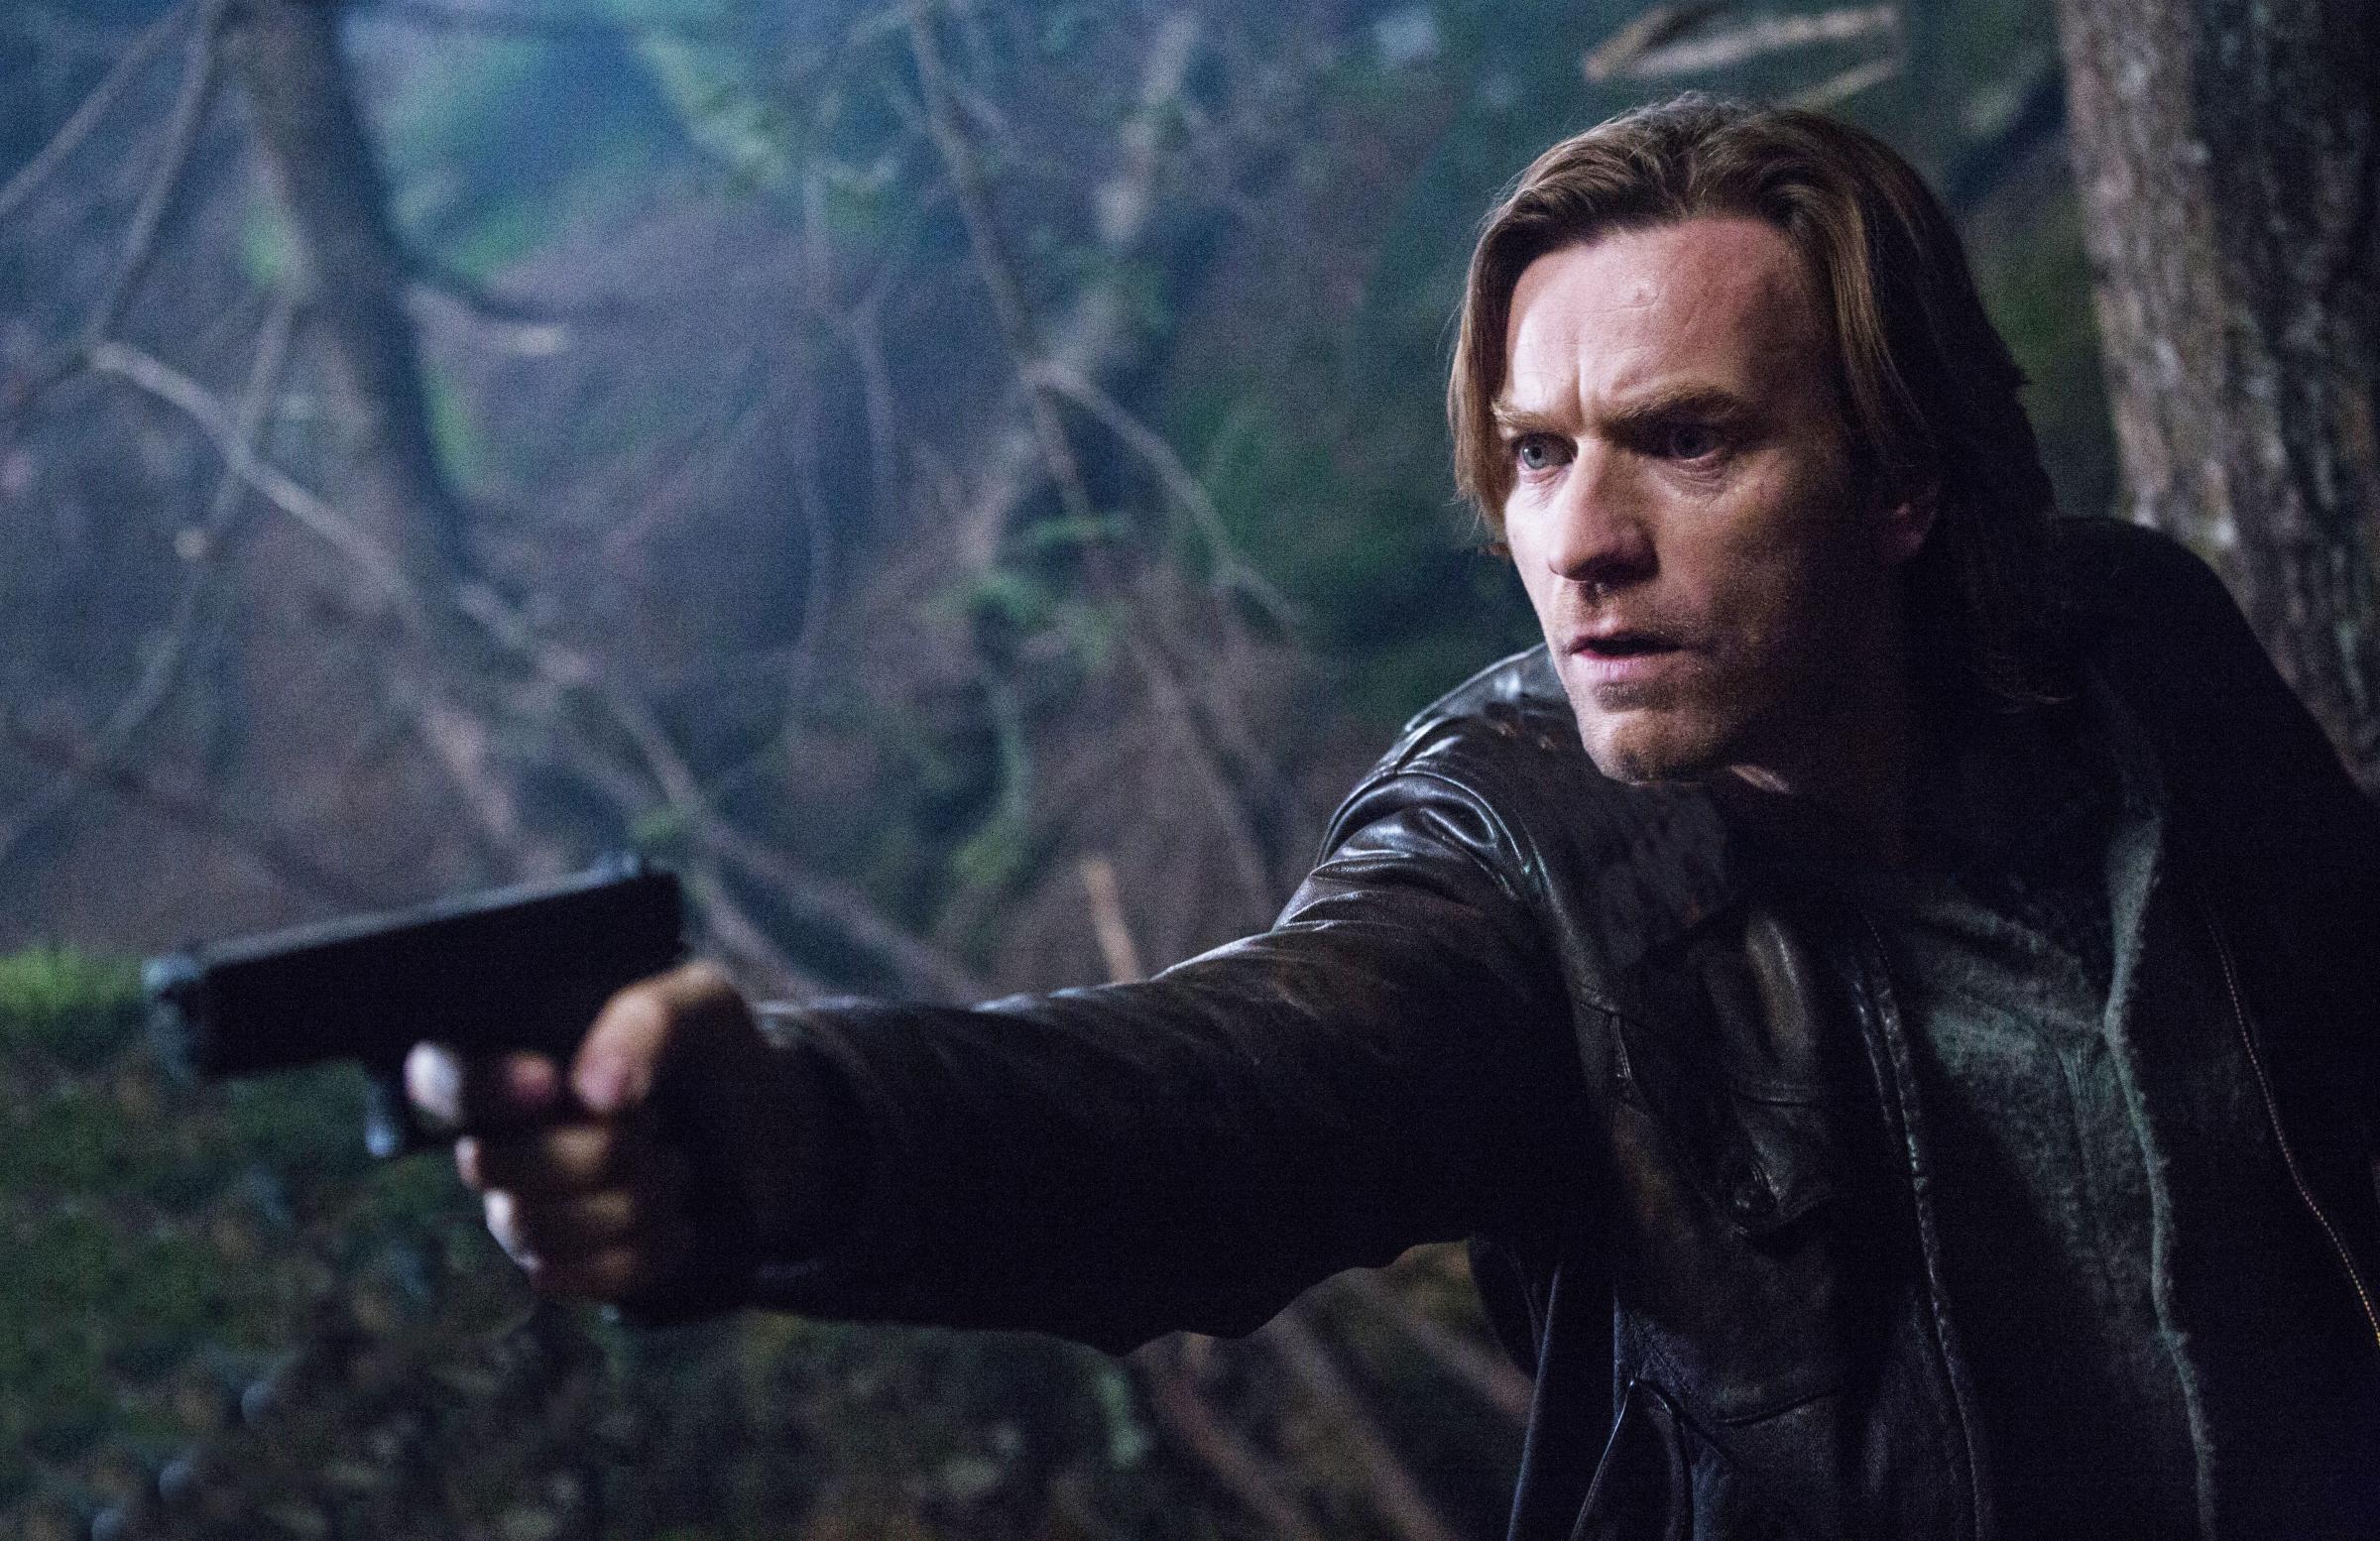 Ewan McGregor as Peregrine "Perry" Makepeace in Our Kind of Traitor, 2016.